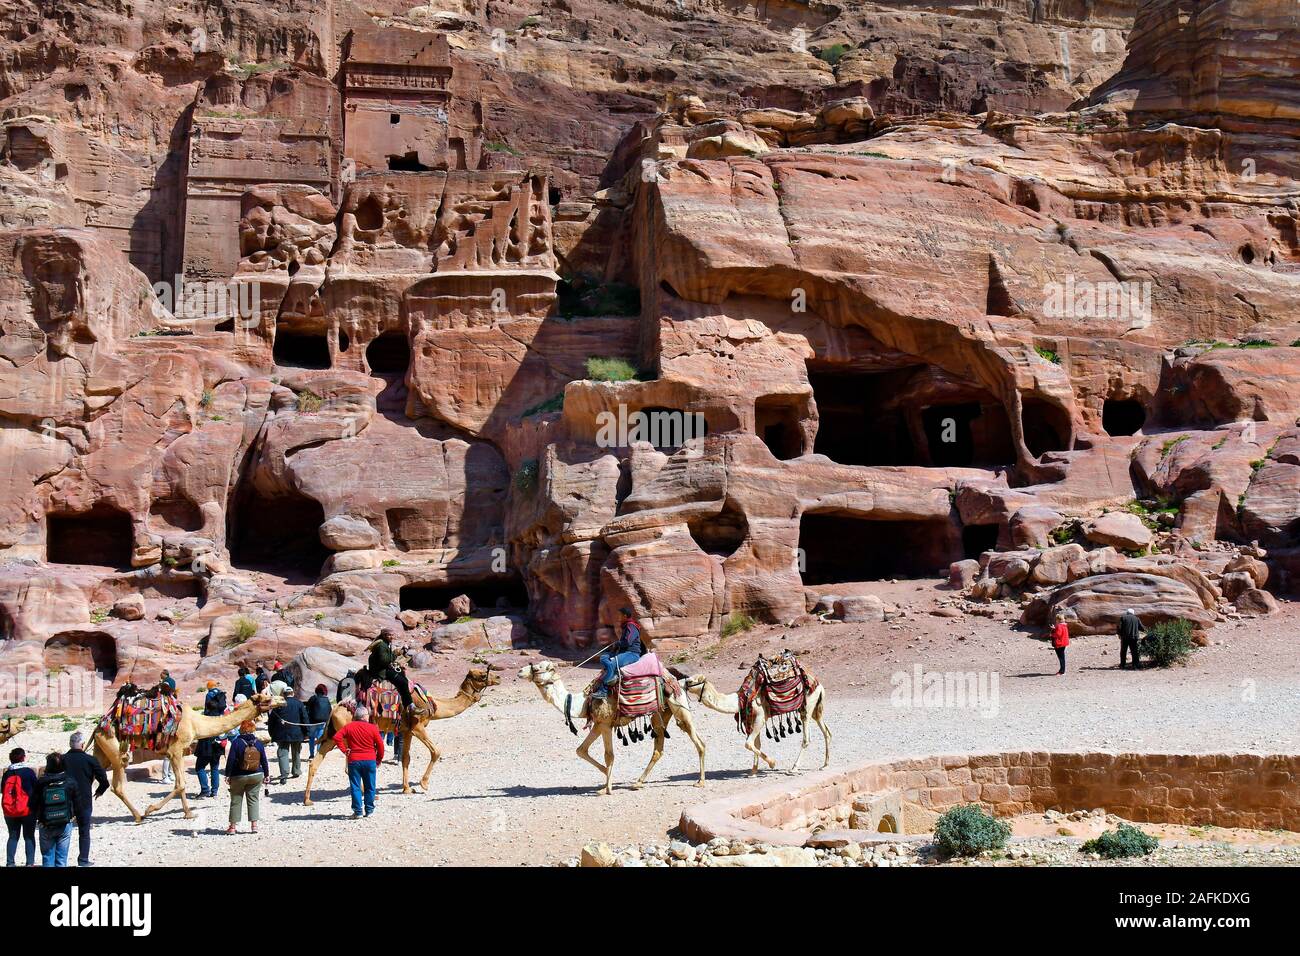 Petra, Jordan - March 06, 2019: Unidentified people and camels in UNESCO World heritage site of ancient Petra Stock Photo